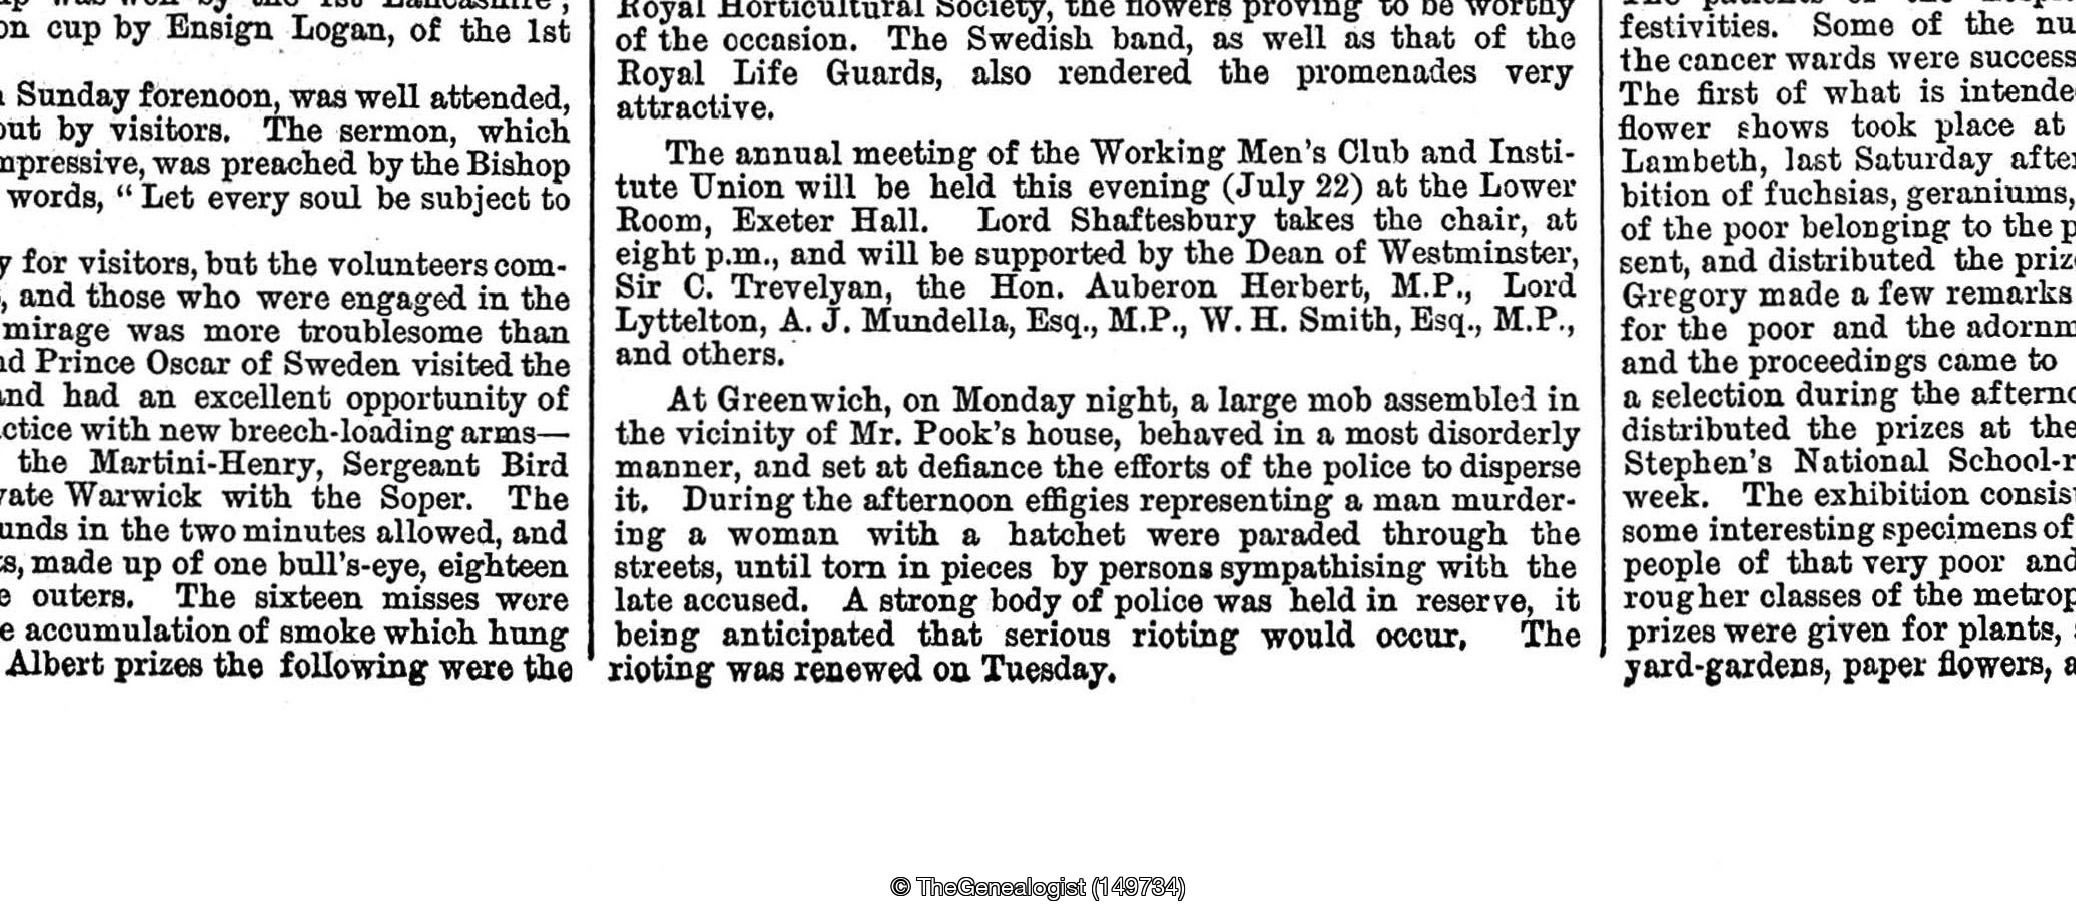 ILN July 22, 1871 reports on a large mob in the vicinity of Mr Pook's house